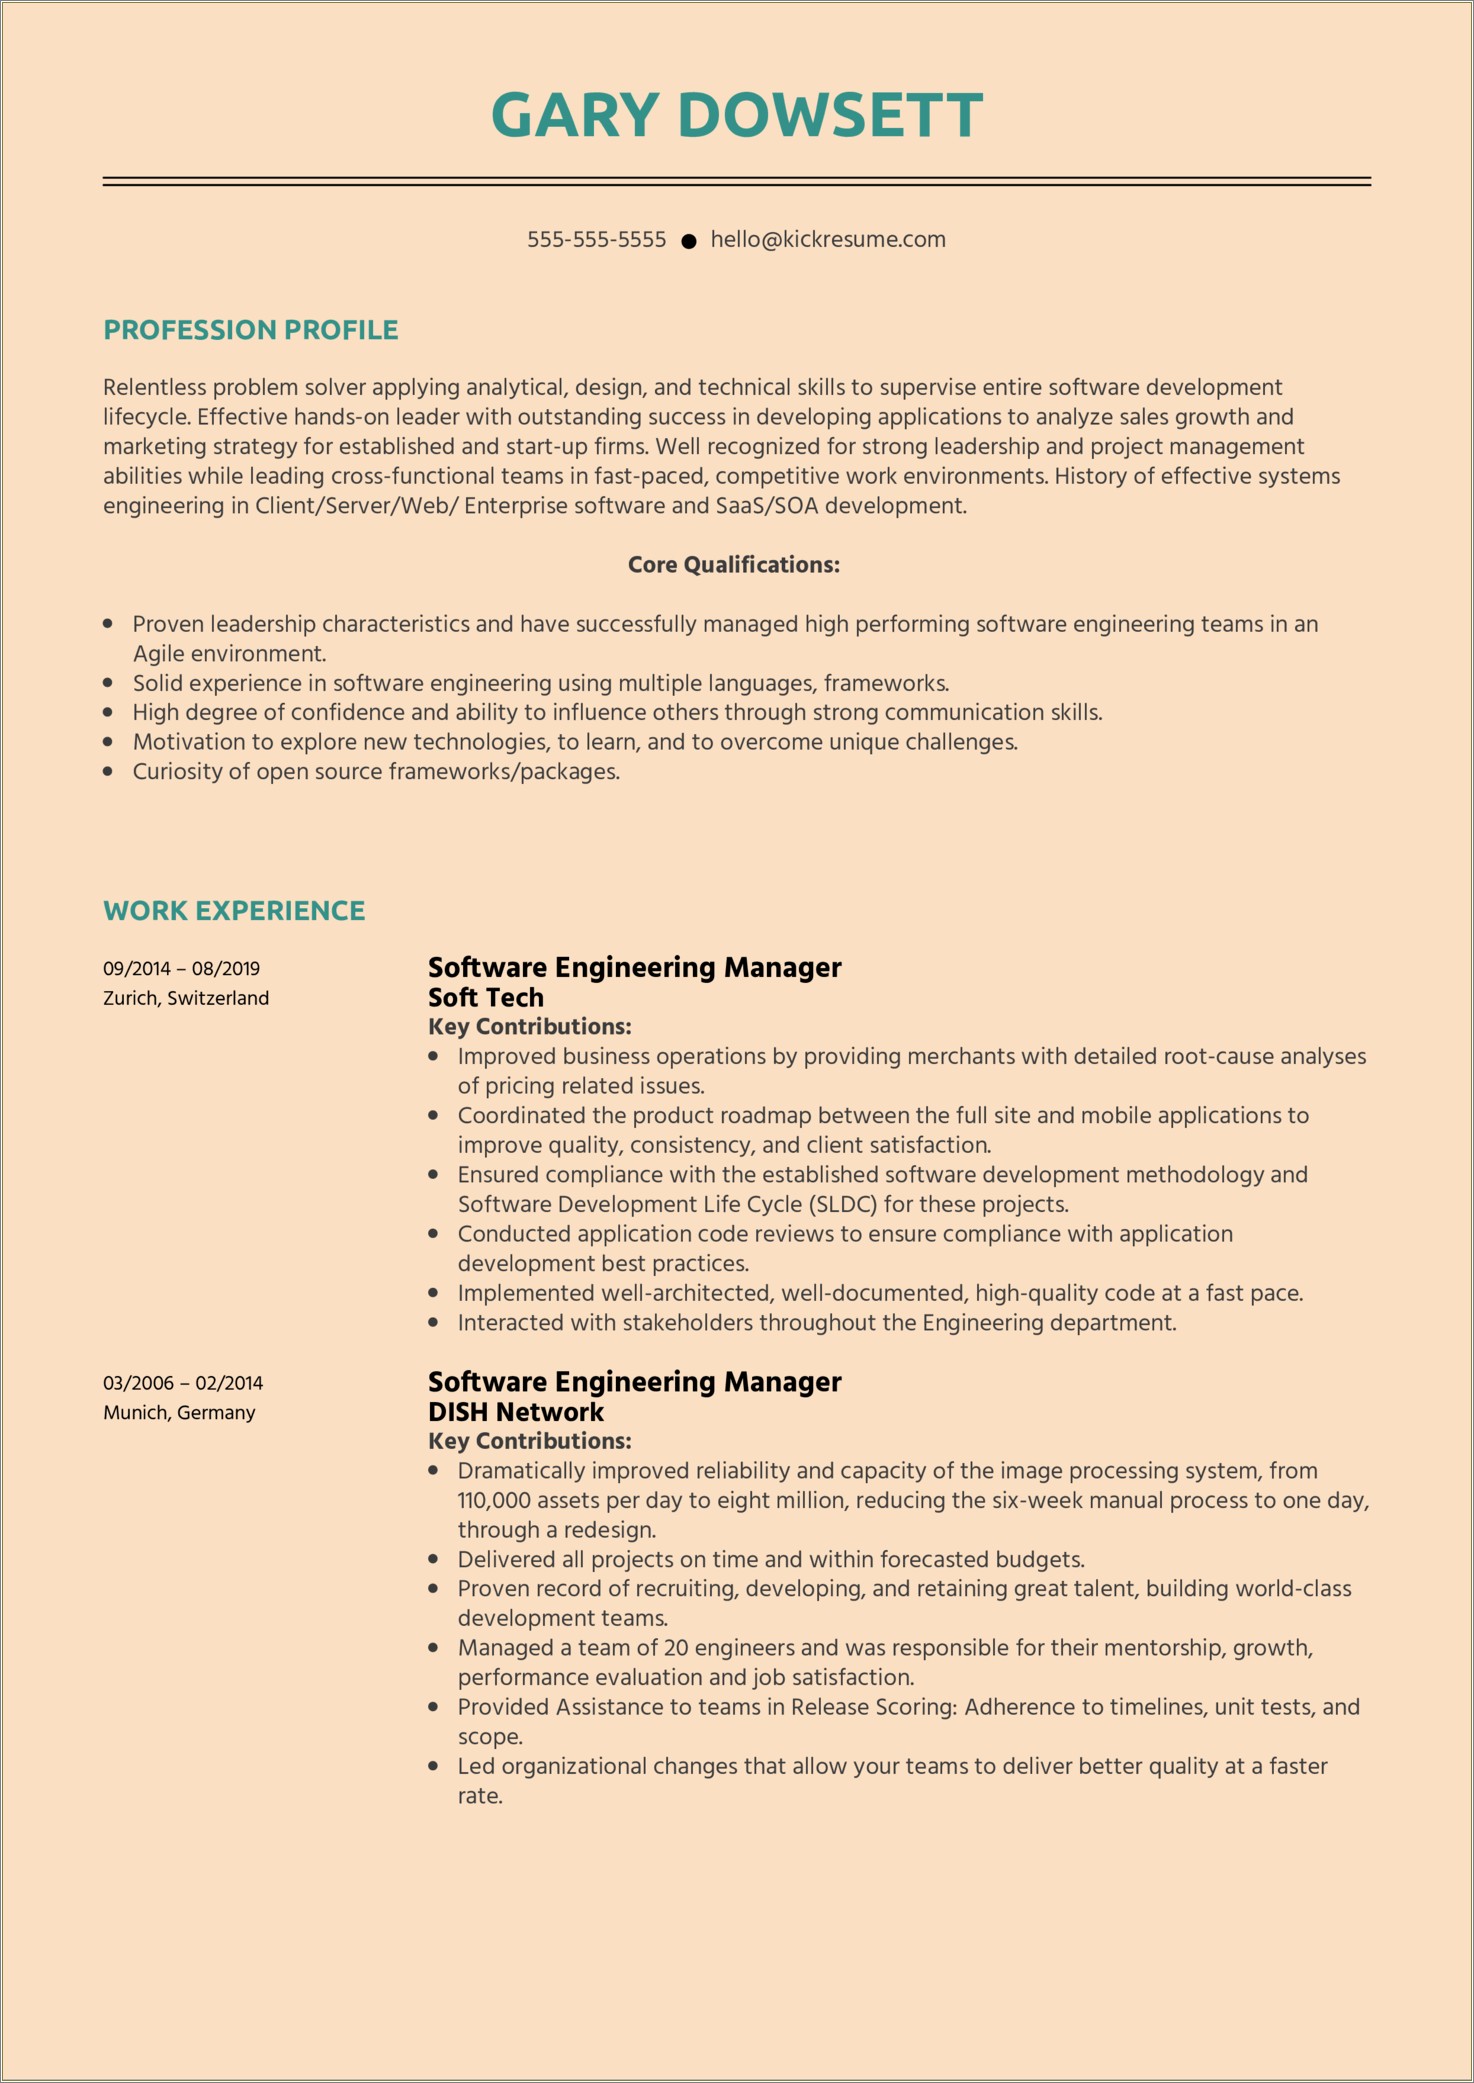 Examples Of A Manager's Resume